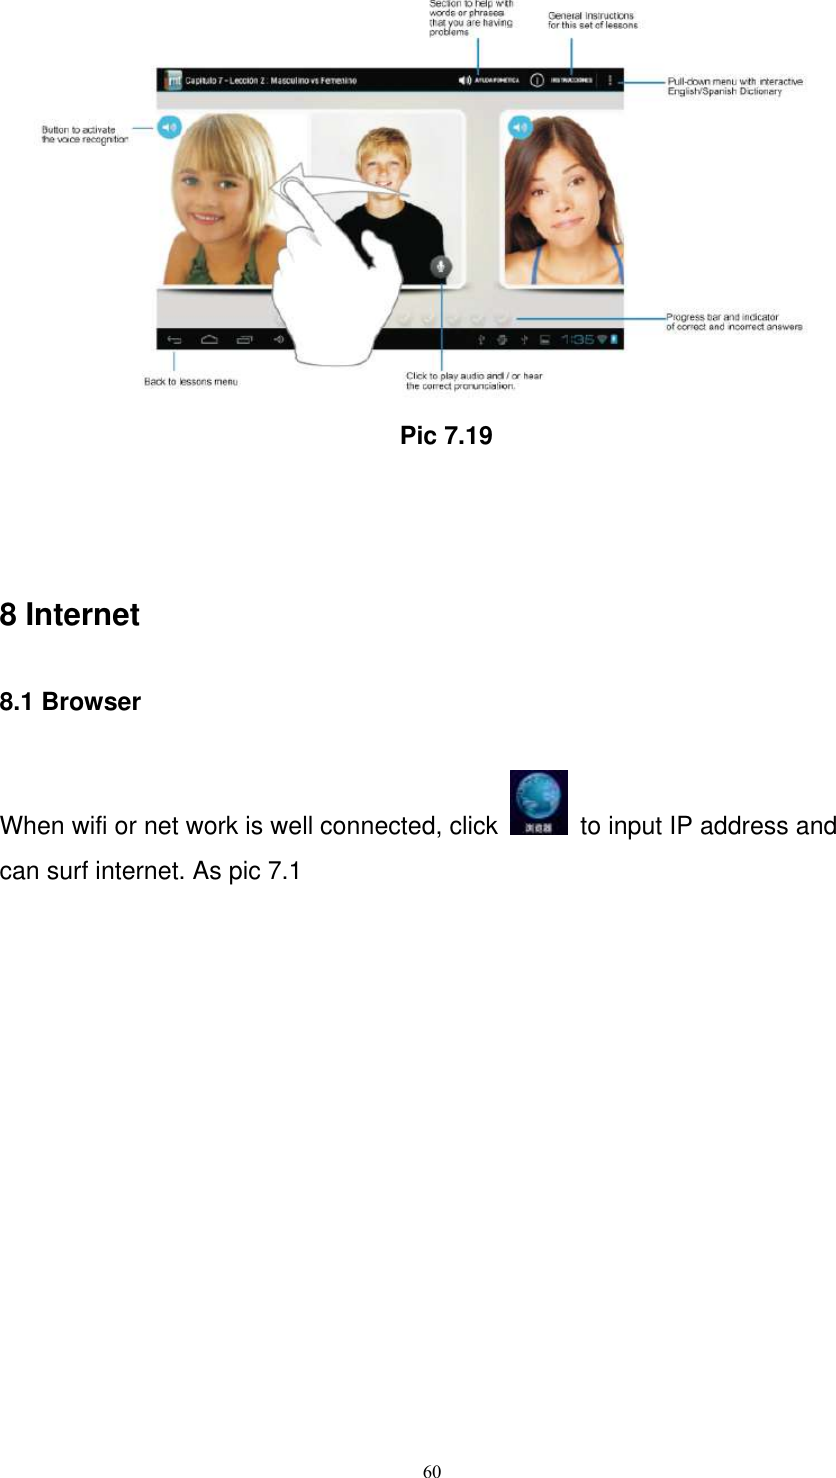      60                                                Pic 7.19     8 Internet 8.1 Browser When wifi or net work is well connected, click    to input IP address and can surf internet. As pic 7.1     